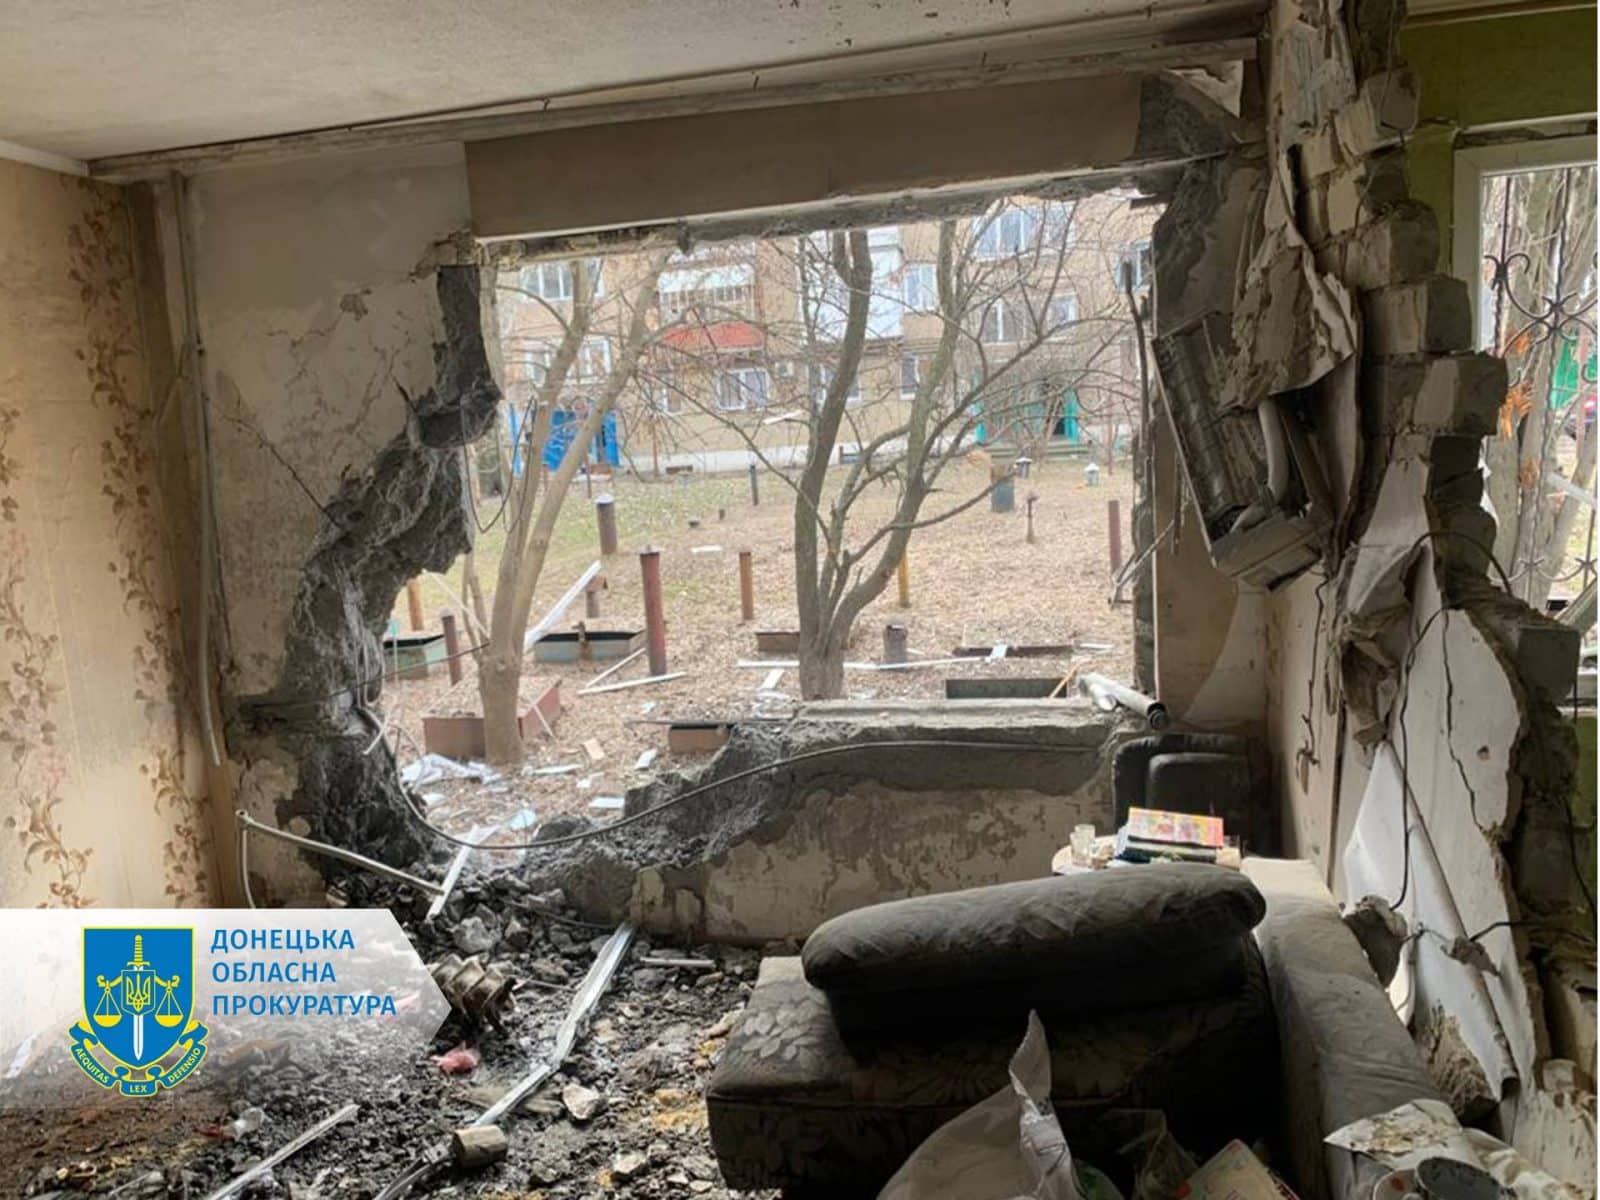 Russian troops shelled 3 settlements in the Donetsk region, 4 civilians were injured: photos